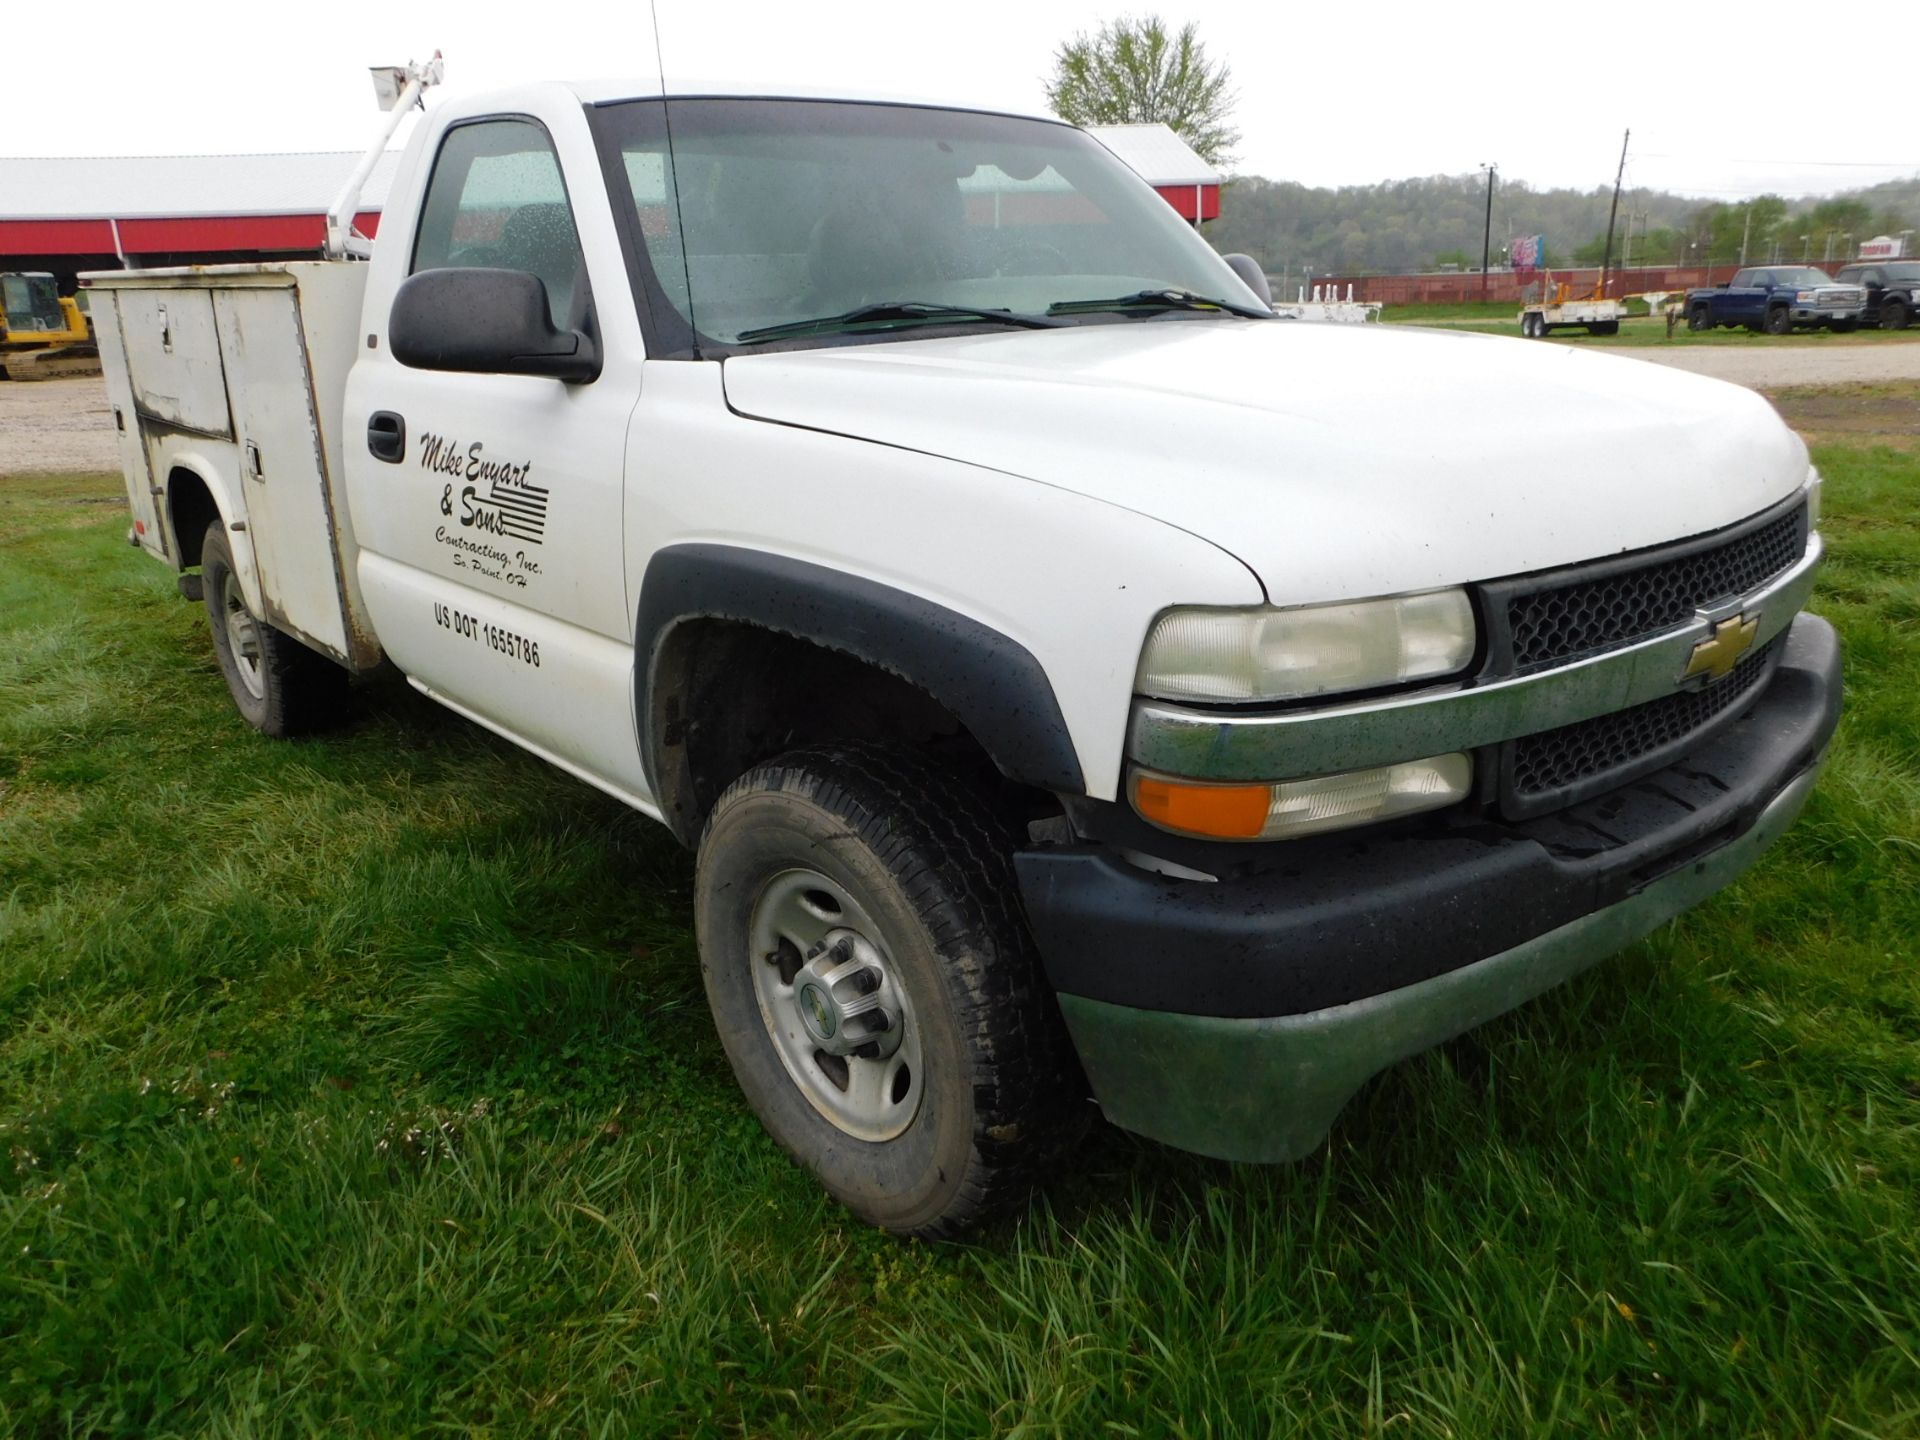 2002 Chevrolet 2500HD Service Truck, VIN 1GBHC24122E130607, Diesel, Automatic, AM/FM, AC, Regular - Image 3 of 23